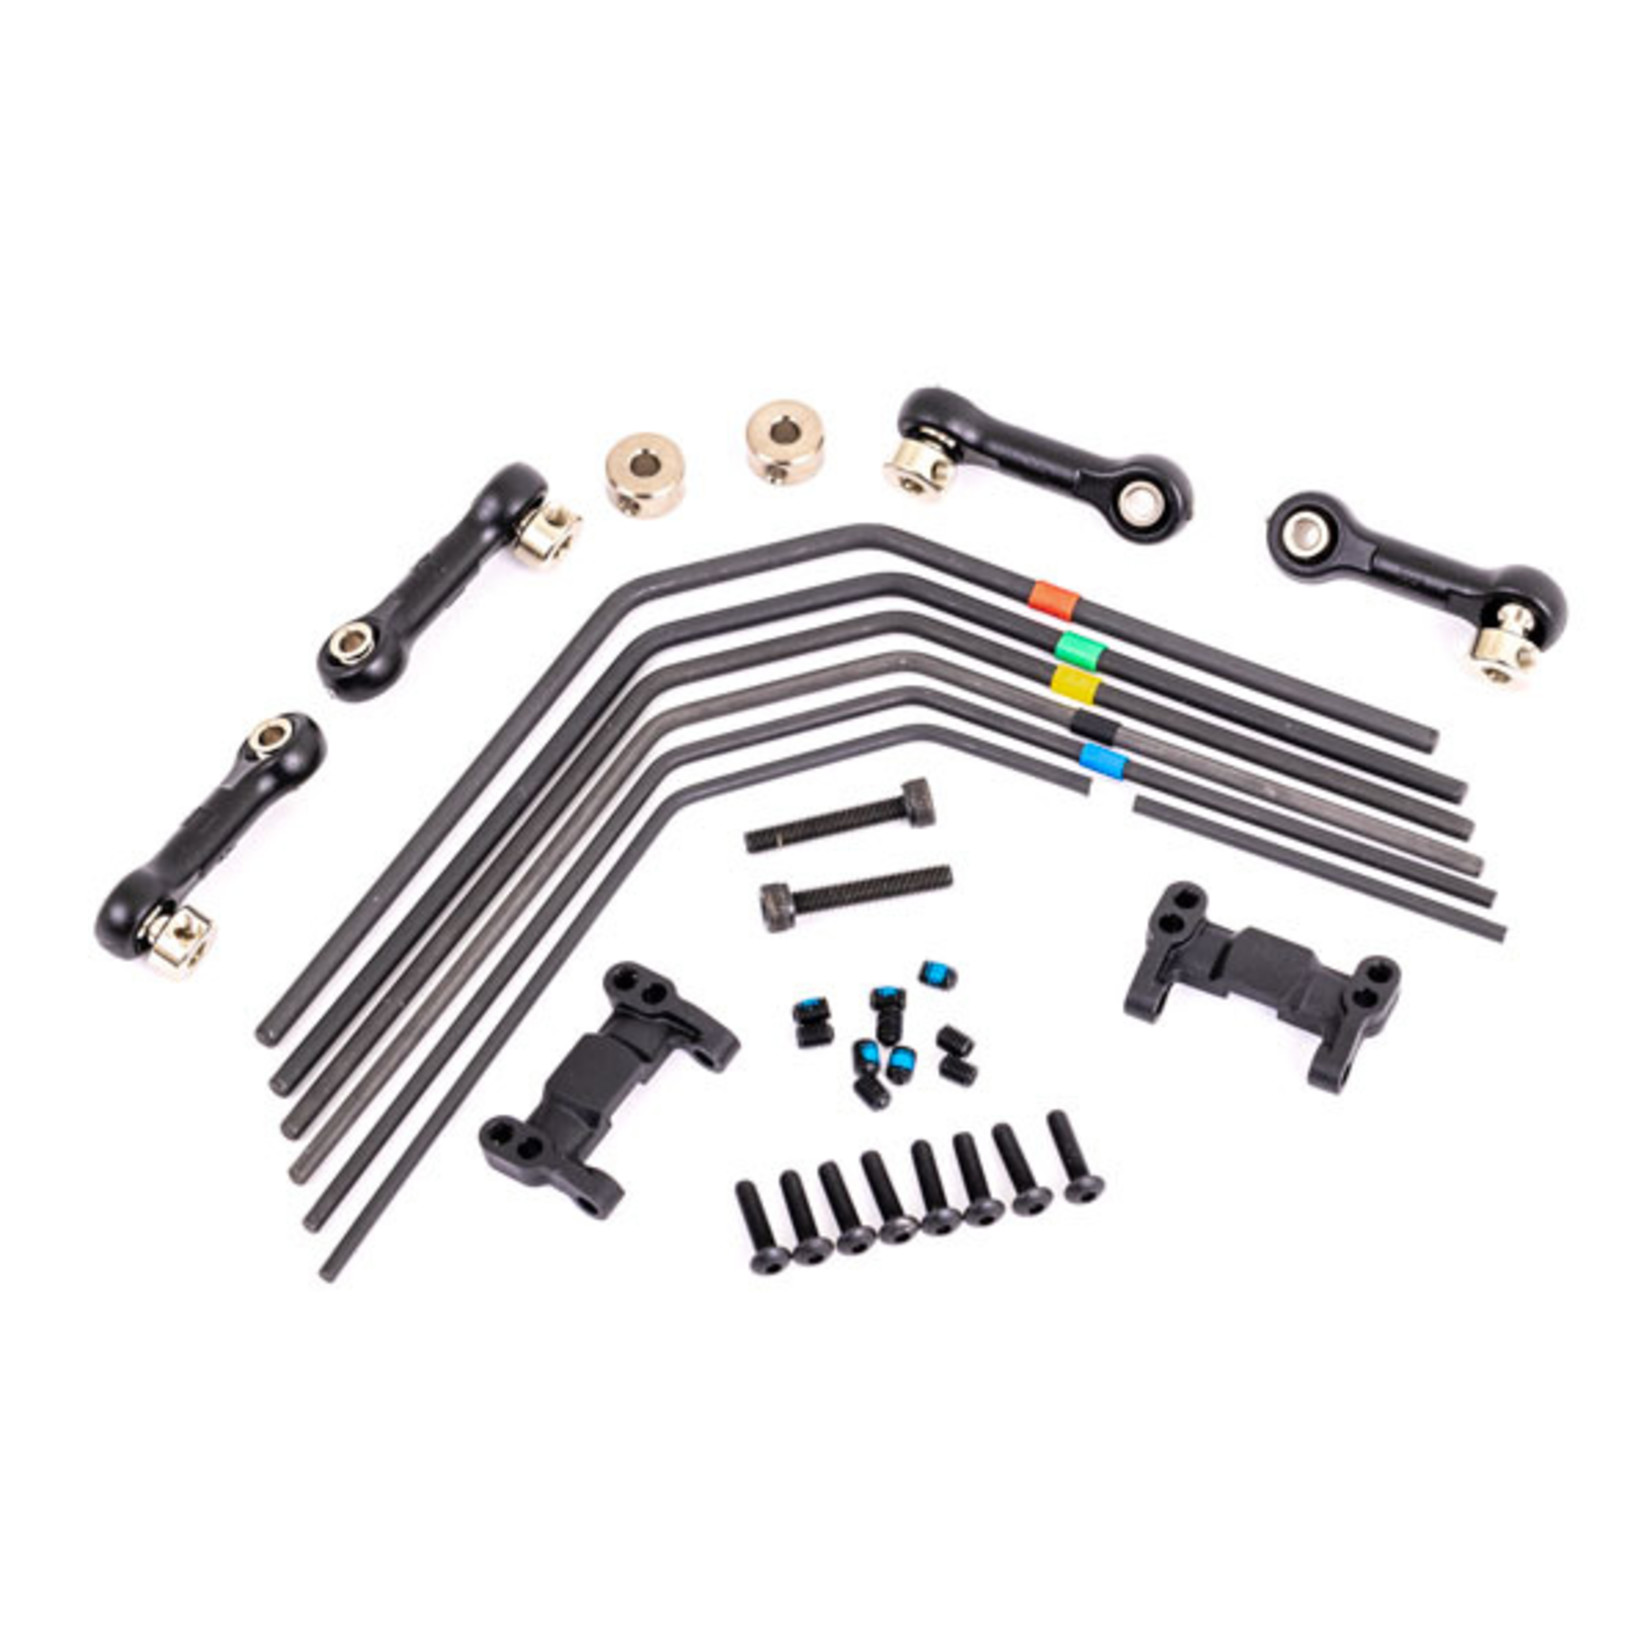 Traxxas 9595 - Sway bar kit, Sledge (front and rear) (incl